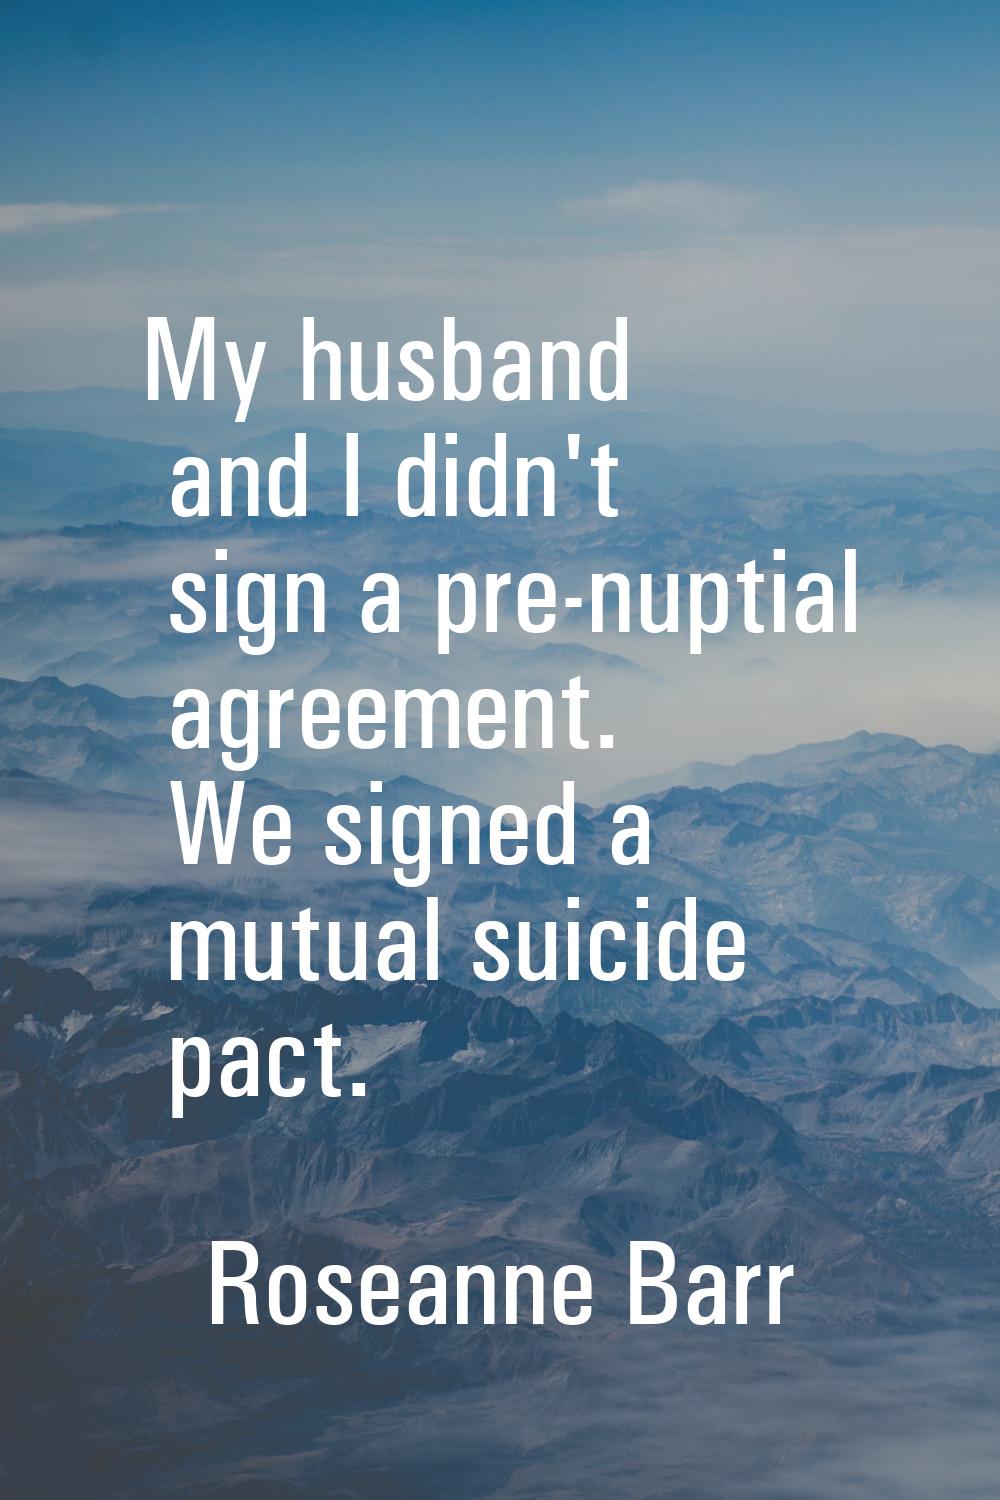 My husband and I didn't sign a pre-nuptial agreement. We signed a mutual suicide pact.